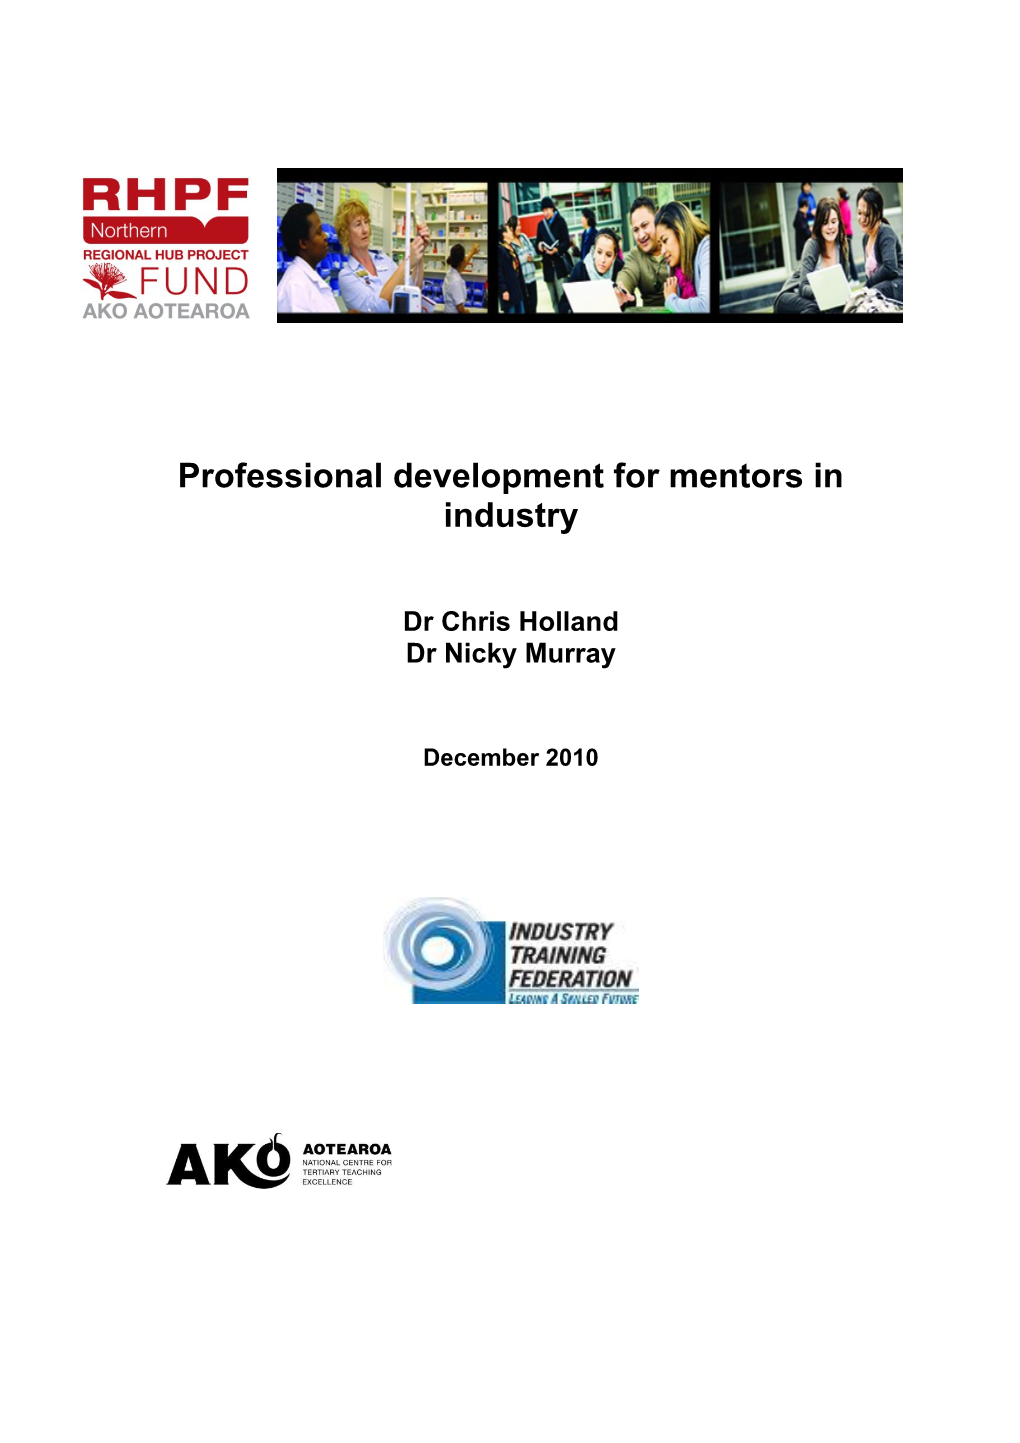 Professional Development for Mentors in Industry